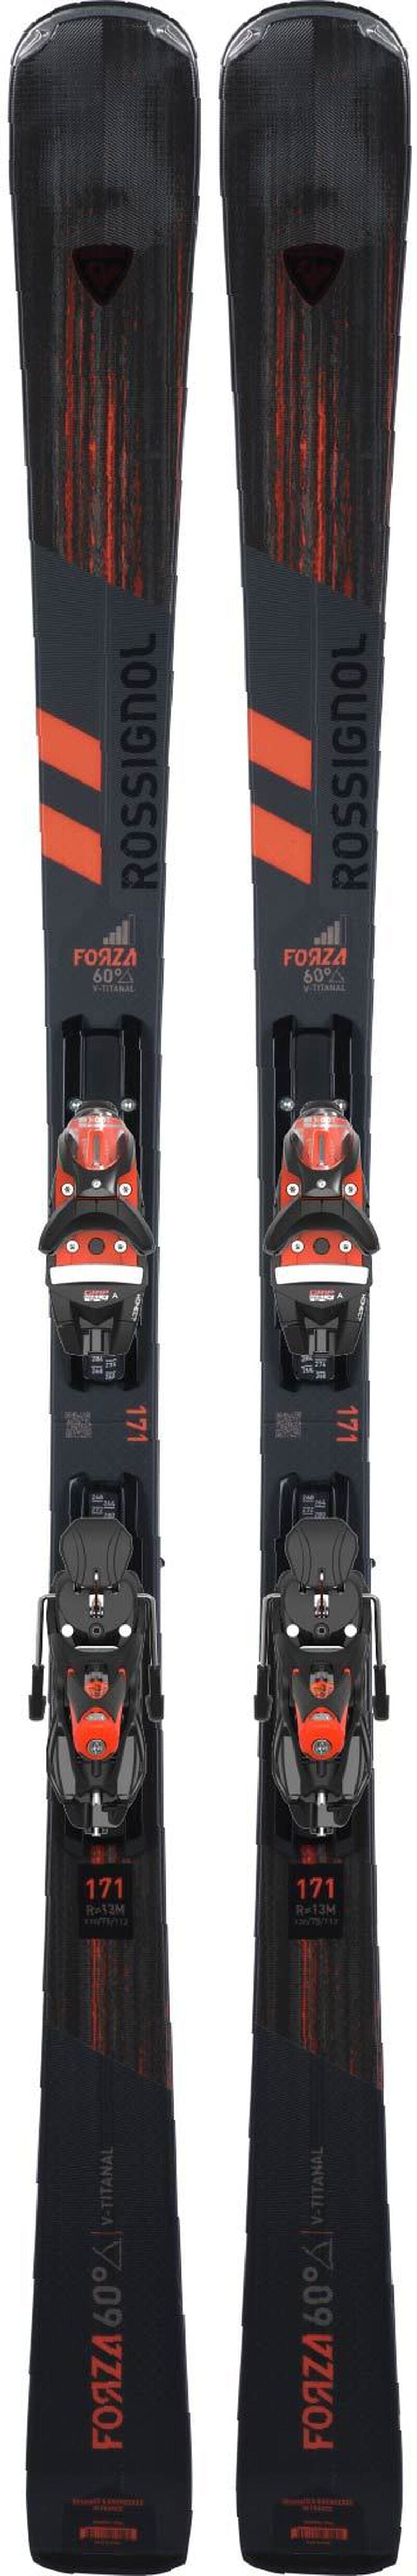 Rossignol Men's Forza 60 V-TI Skis with SPX 12 Konect GW Bindings